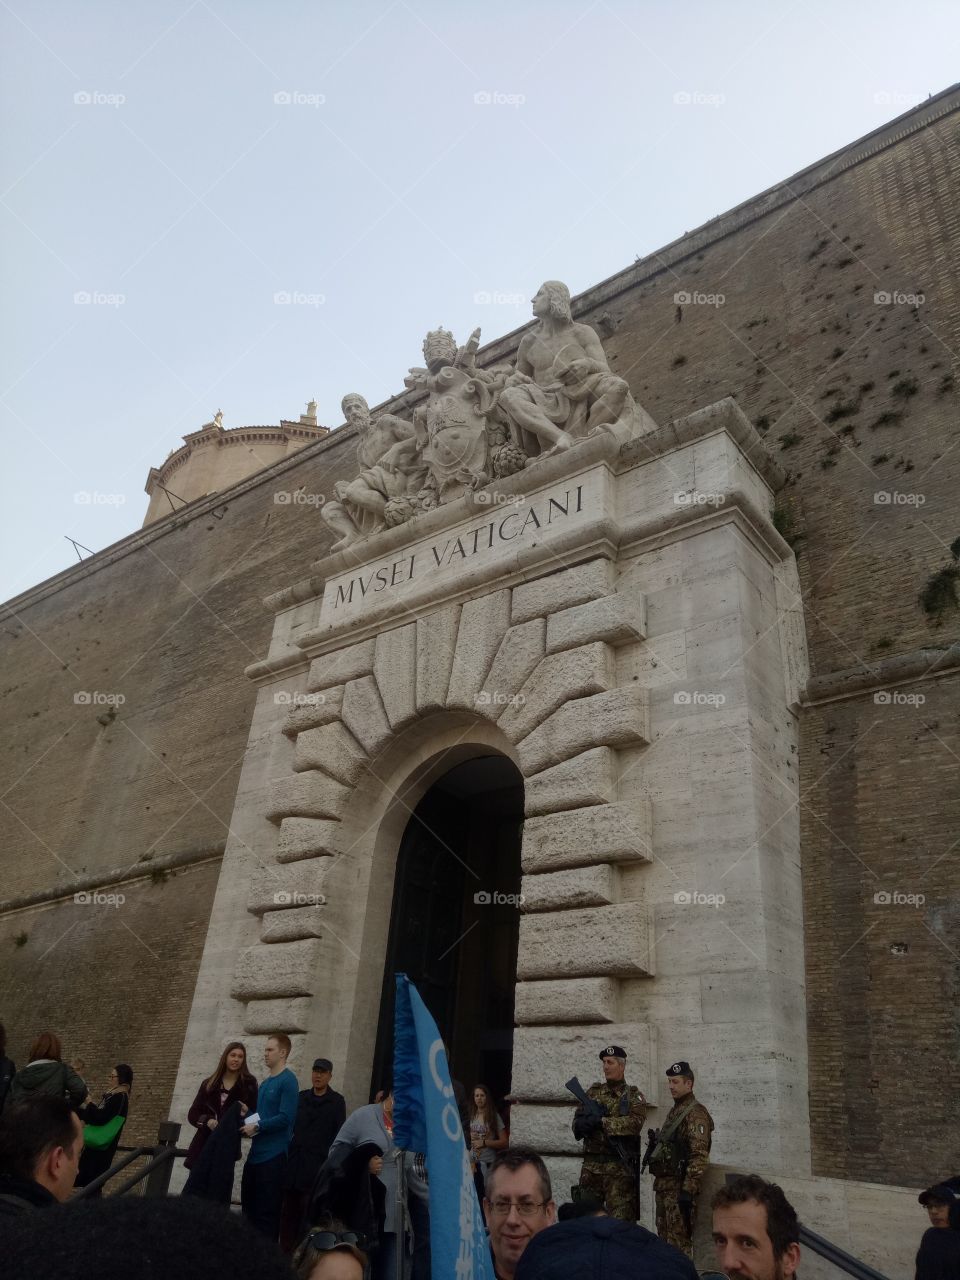 got to tick the vatican city off my bucket list. tips: pay extra (around 50€) to join the guided tour to get as much information as you can and to avoid spending hours waiting in line to enter.